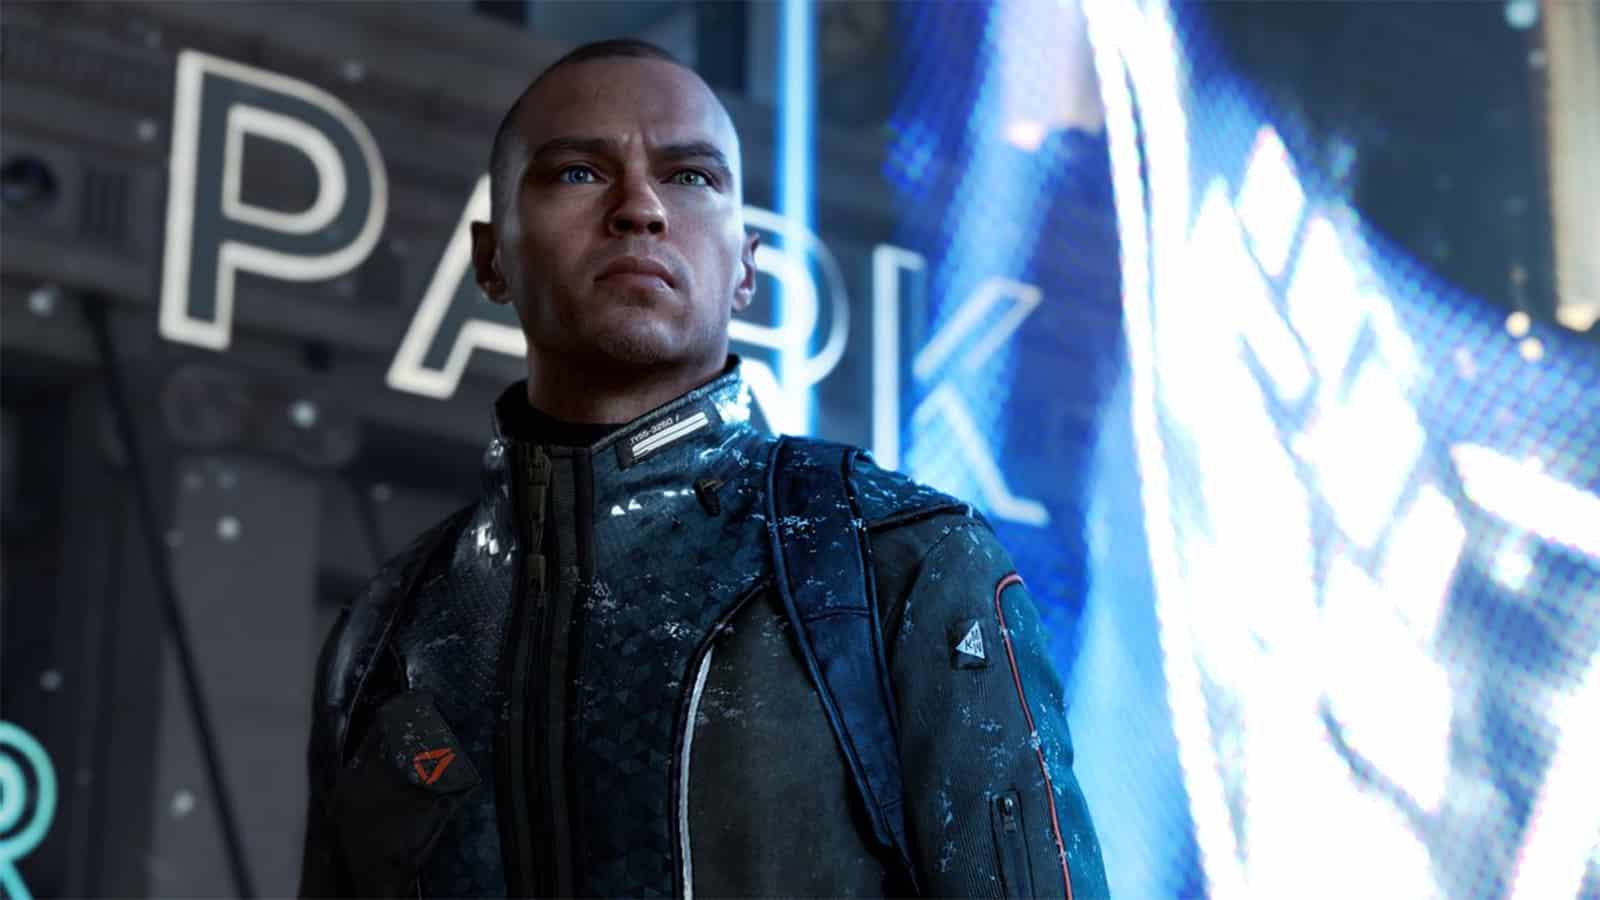 Markus in the Detroit Become Human cast